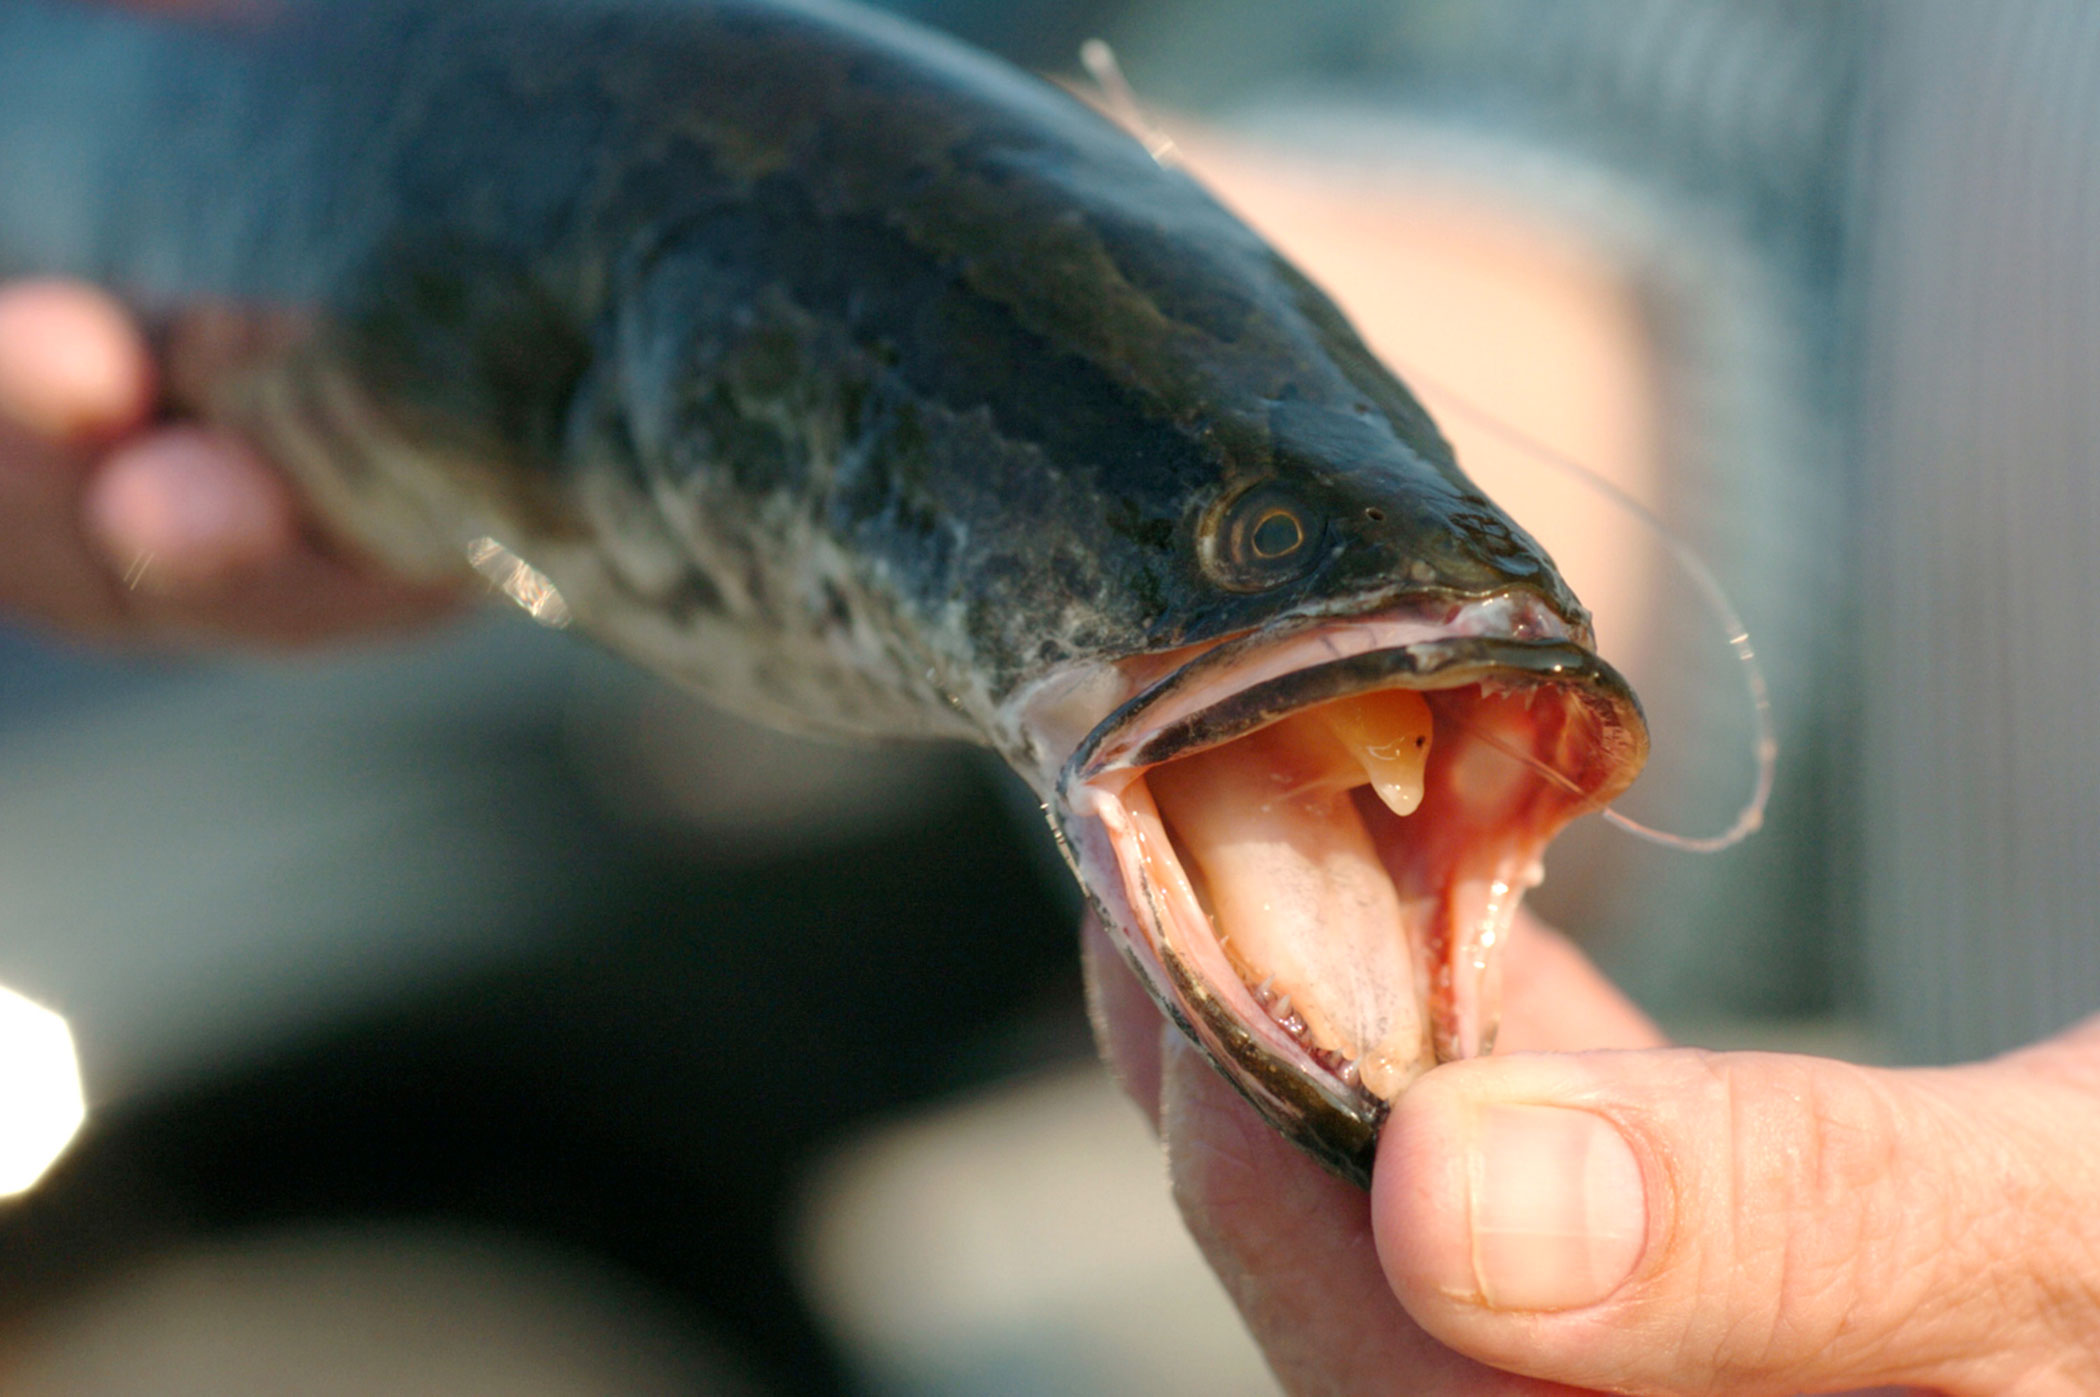 The northern snakehead fish has teeth like a shark and the ability to walk on land. The carnivorous fish hails from Asia but in 2002 it appeared in a small Maryland town, where it promptly obliterated wildlife in the local pond.  Fishzilla  has been spotted everywhere from New York to California.